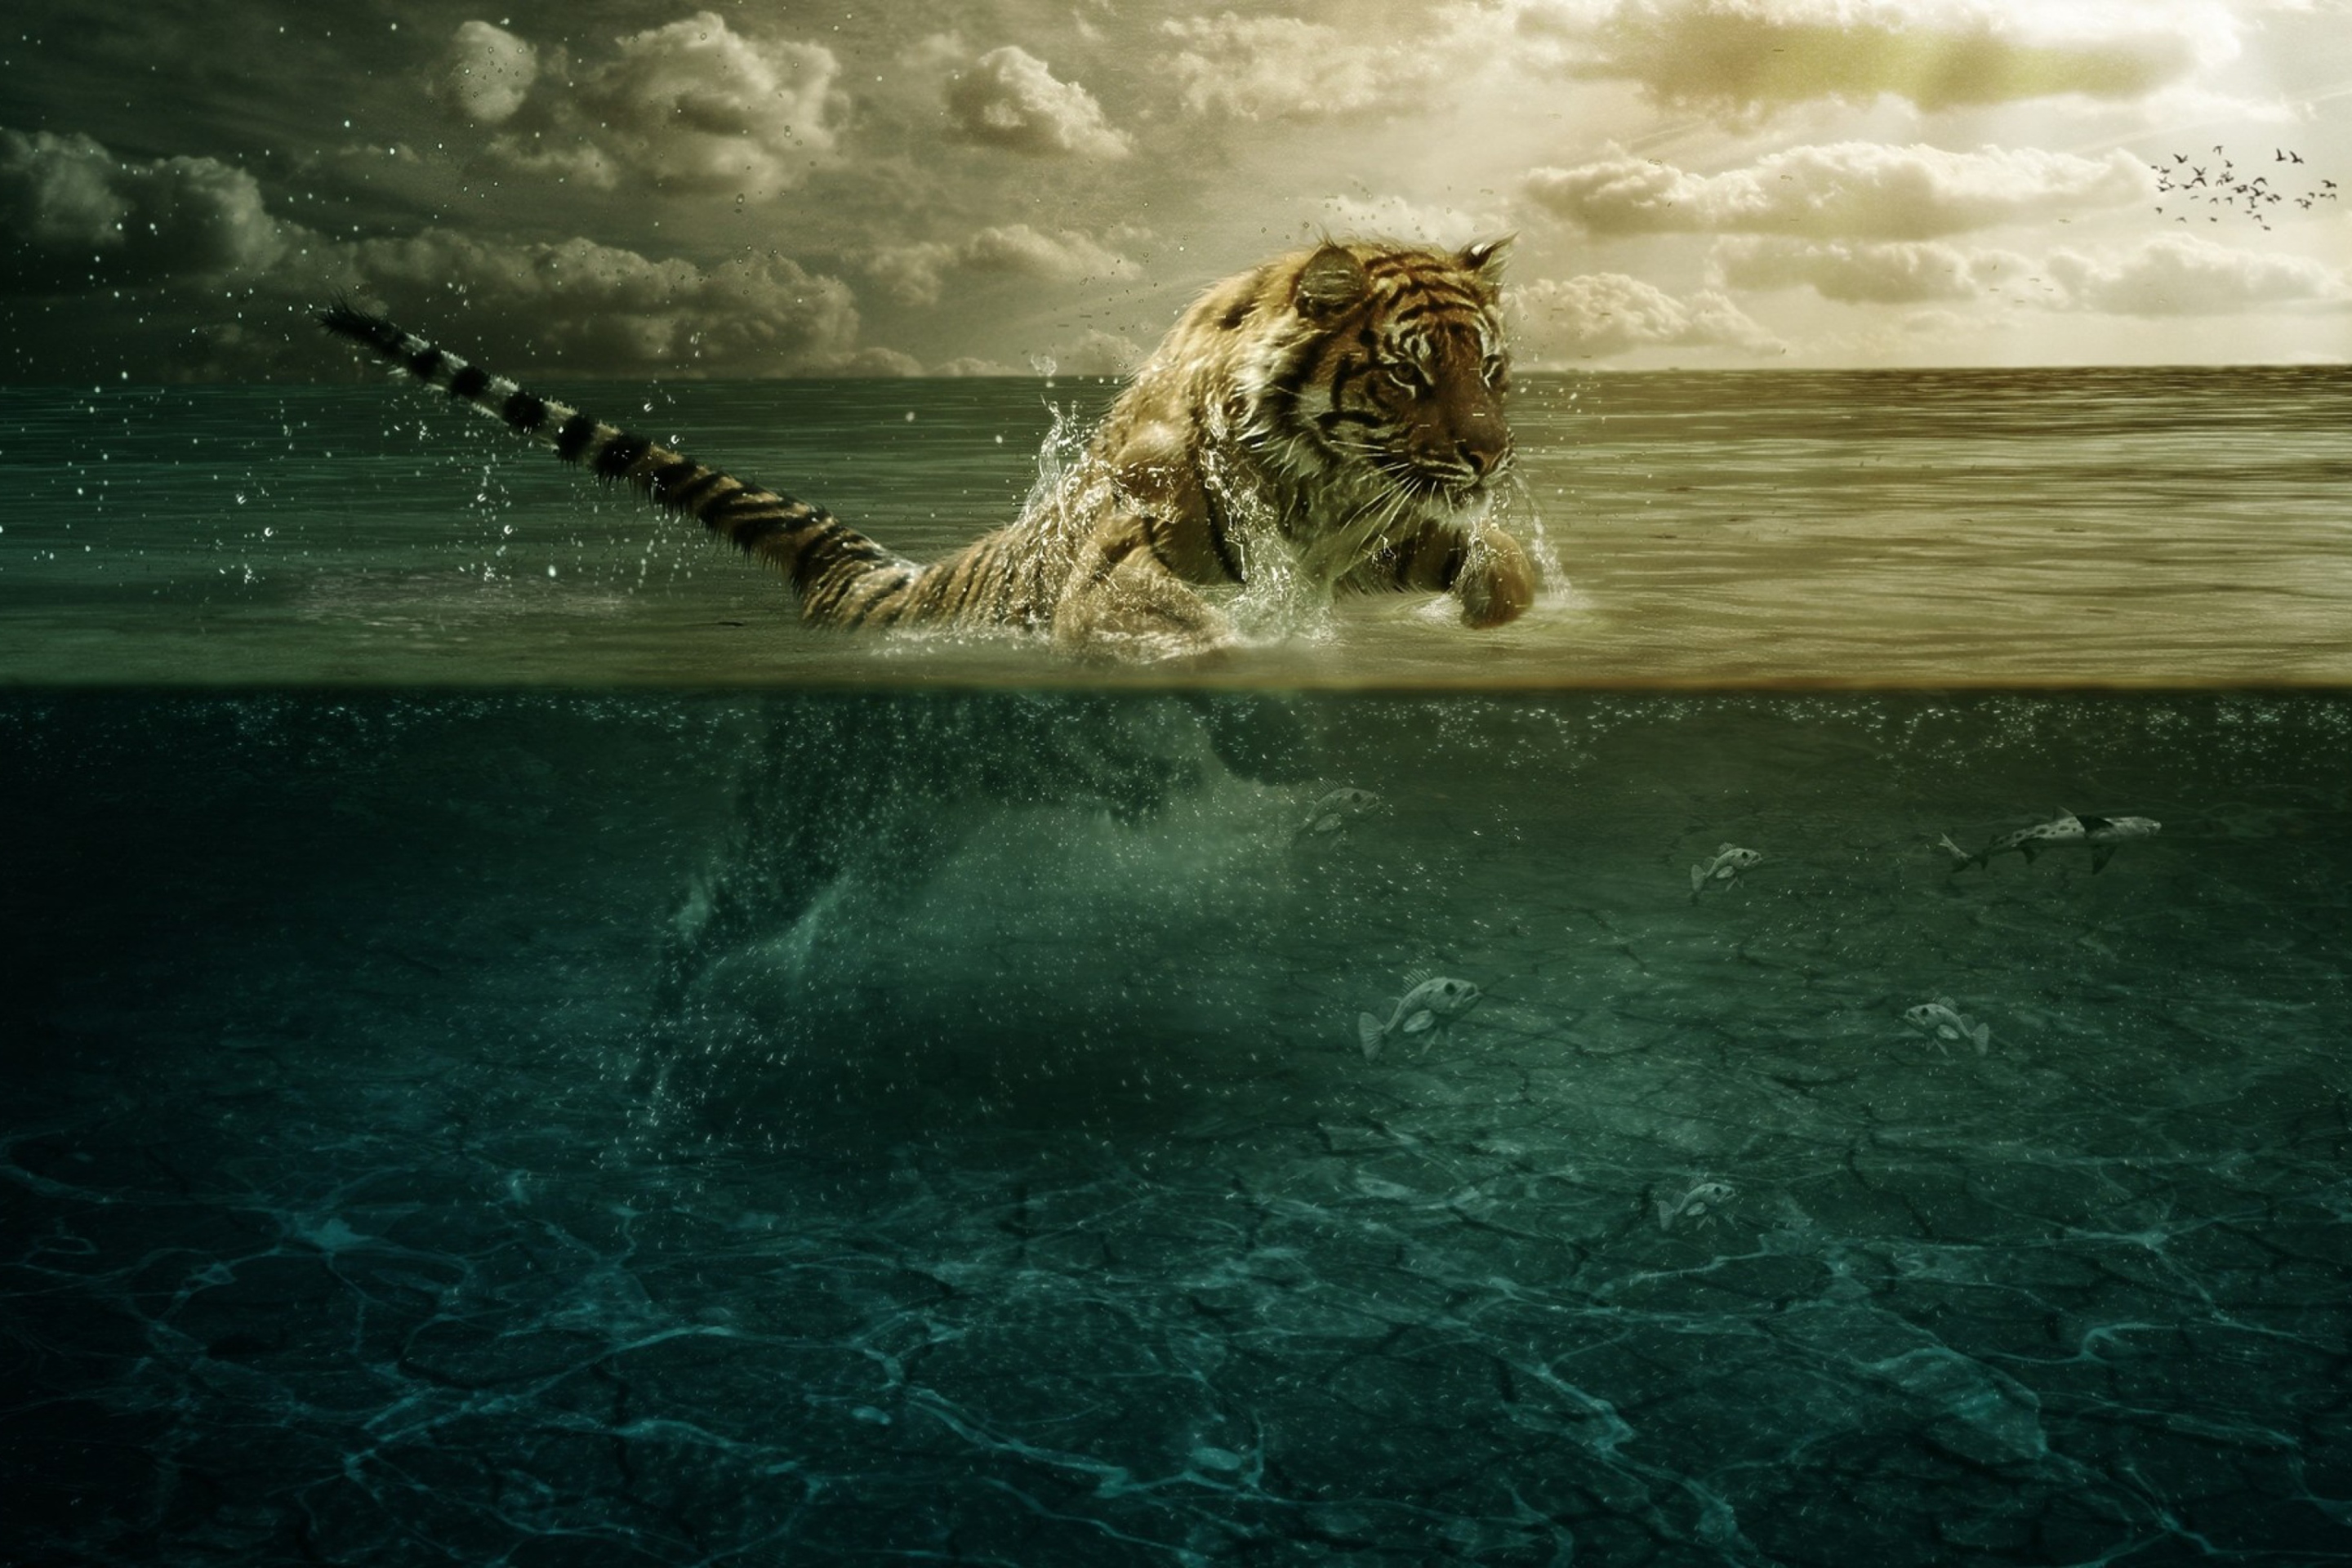 Tiger Jumping Out Of Water wallpaper 2880x1920